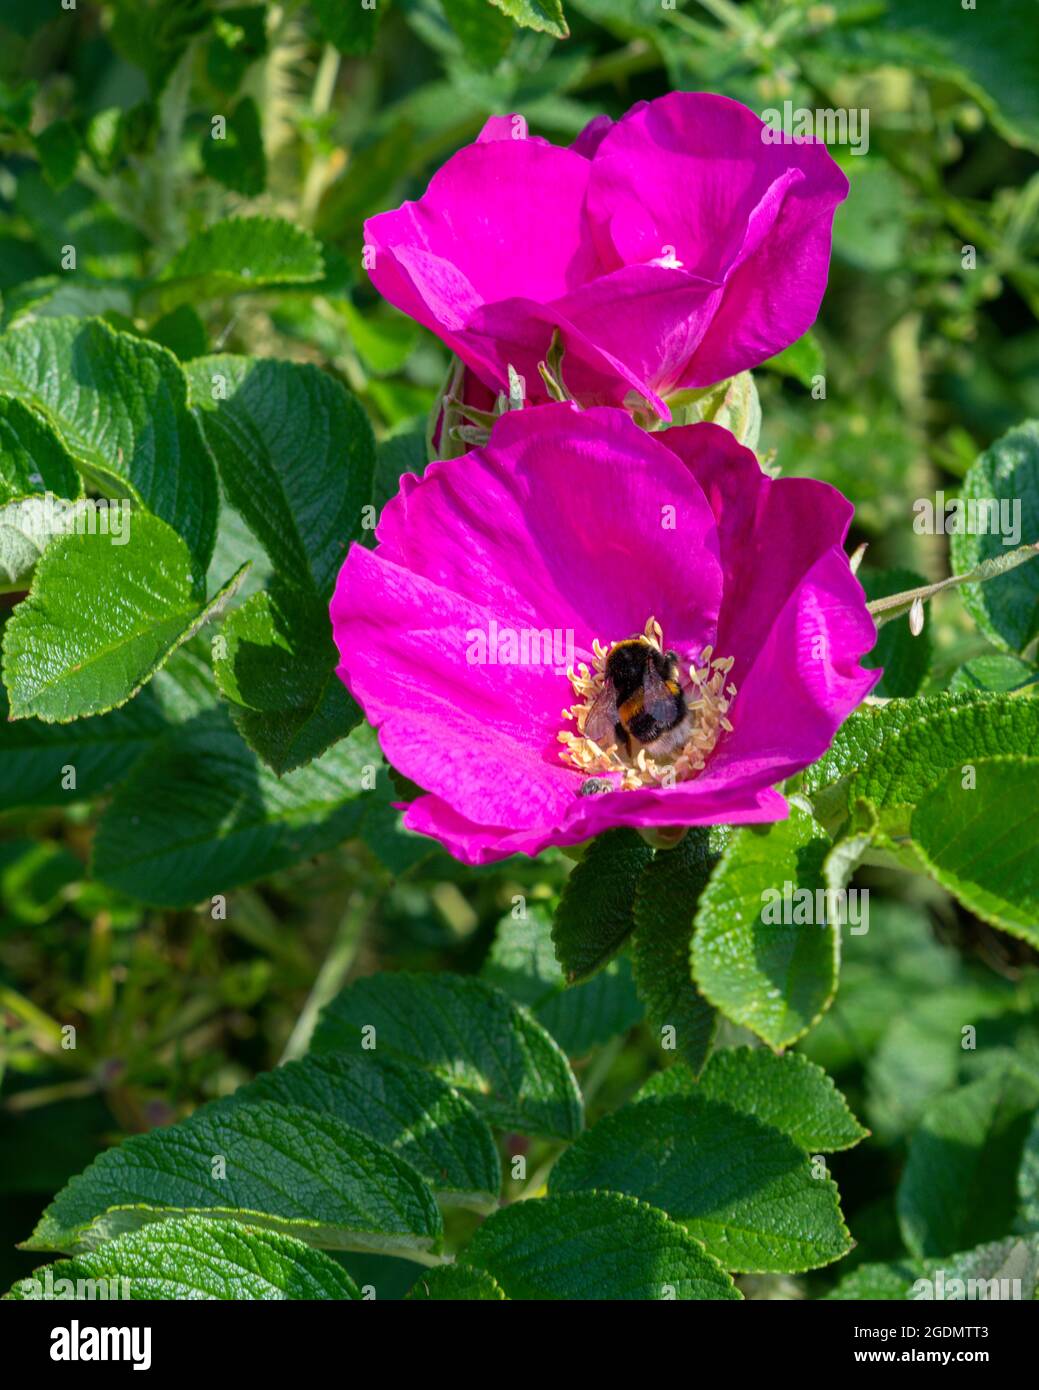 A worker bee collecting nectar from a dog rose, Filey, North Yorkshire, UK Stock Photo